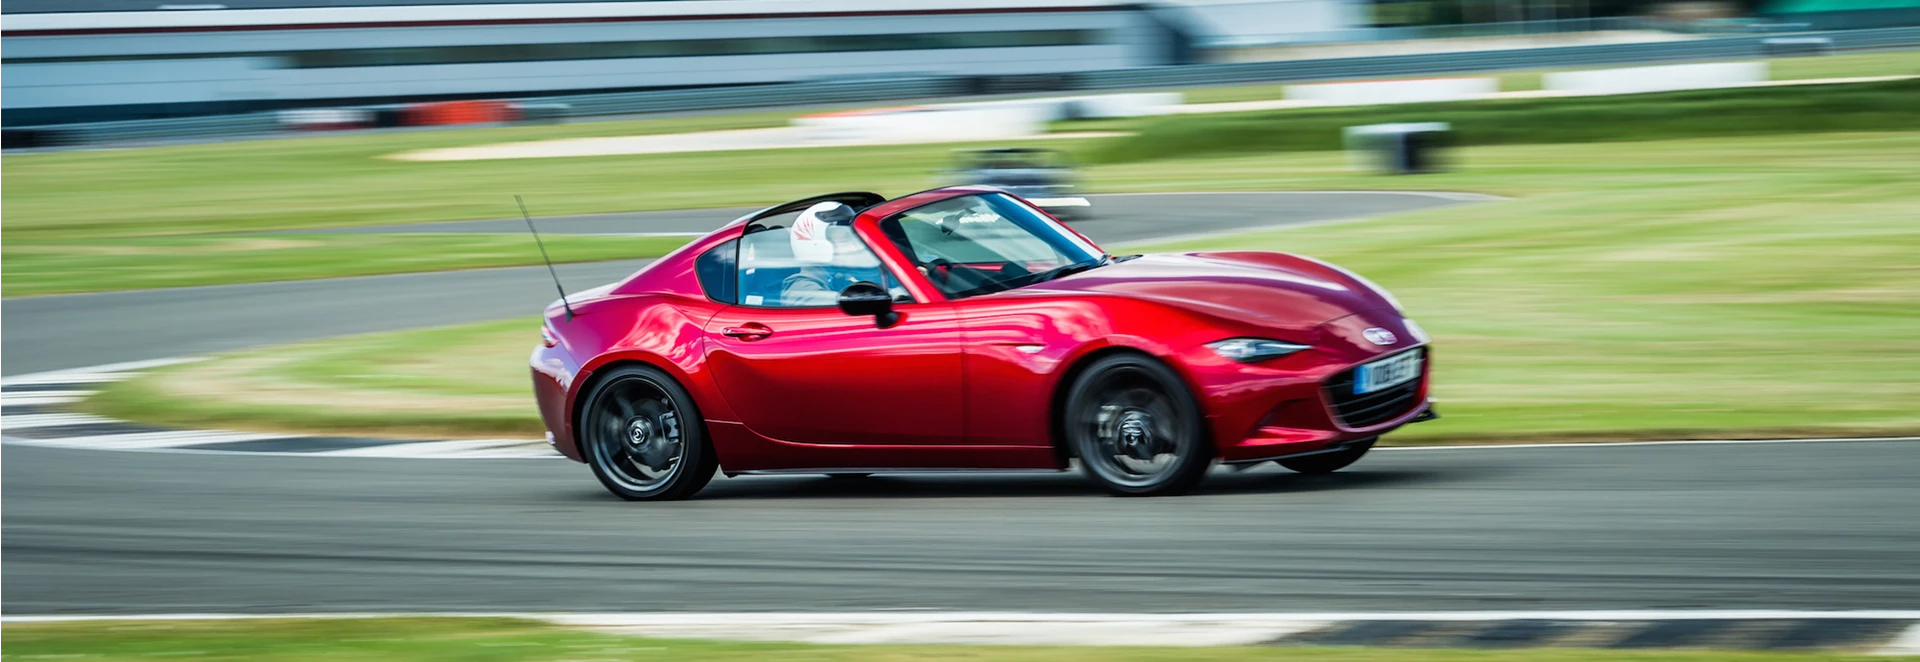 Tackling Silverstone's famous Stowe Circuit in the Mazda MX-5